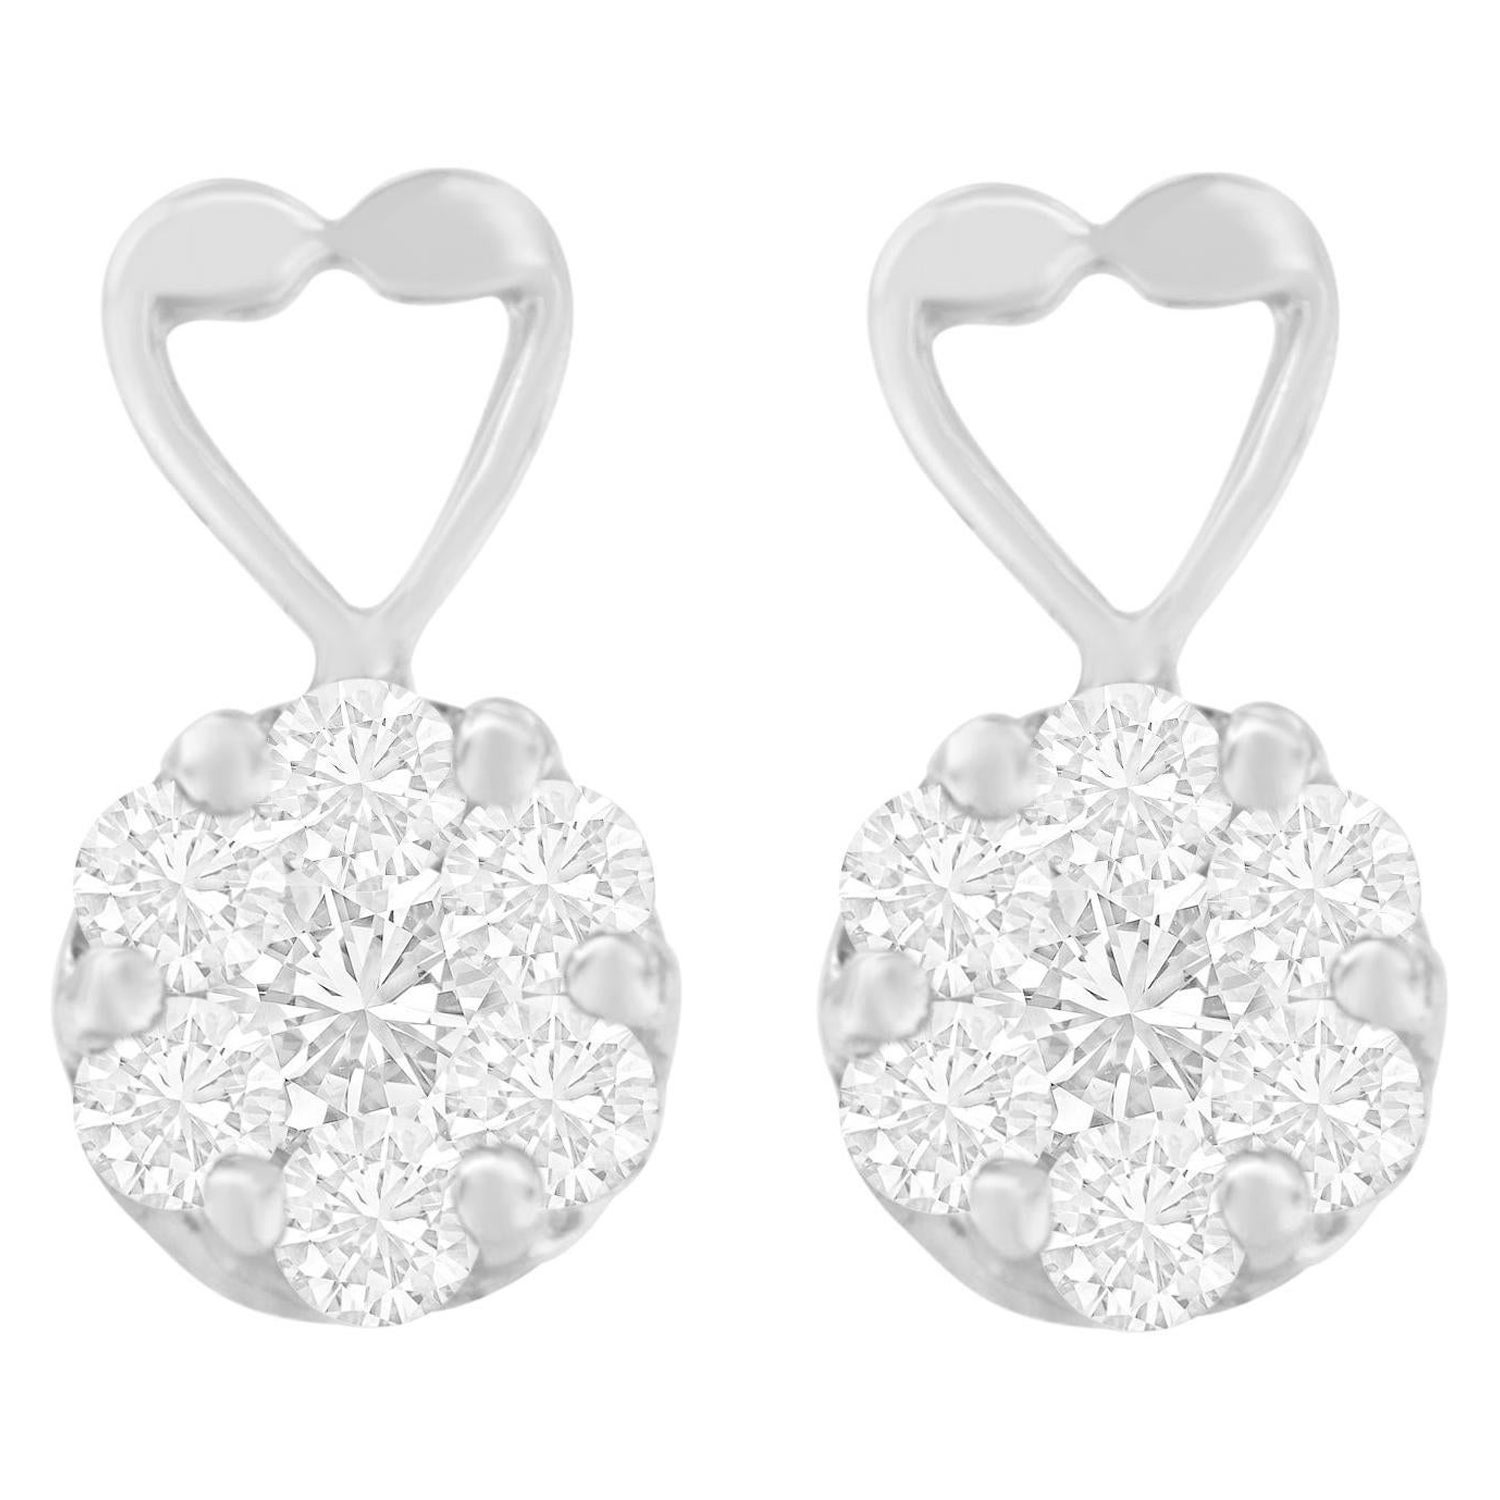 14K White Gold 1 1/4 Carat Round-Cut Diamond Floral Cluster Heart Earrings